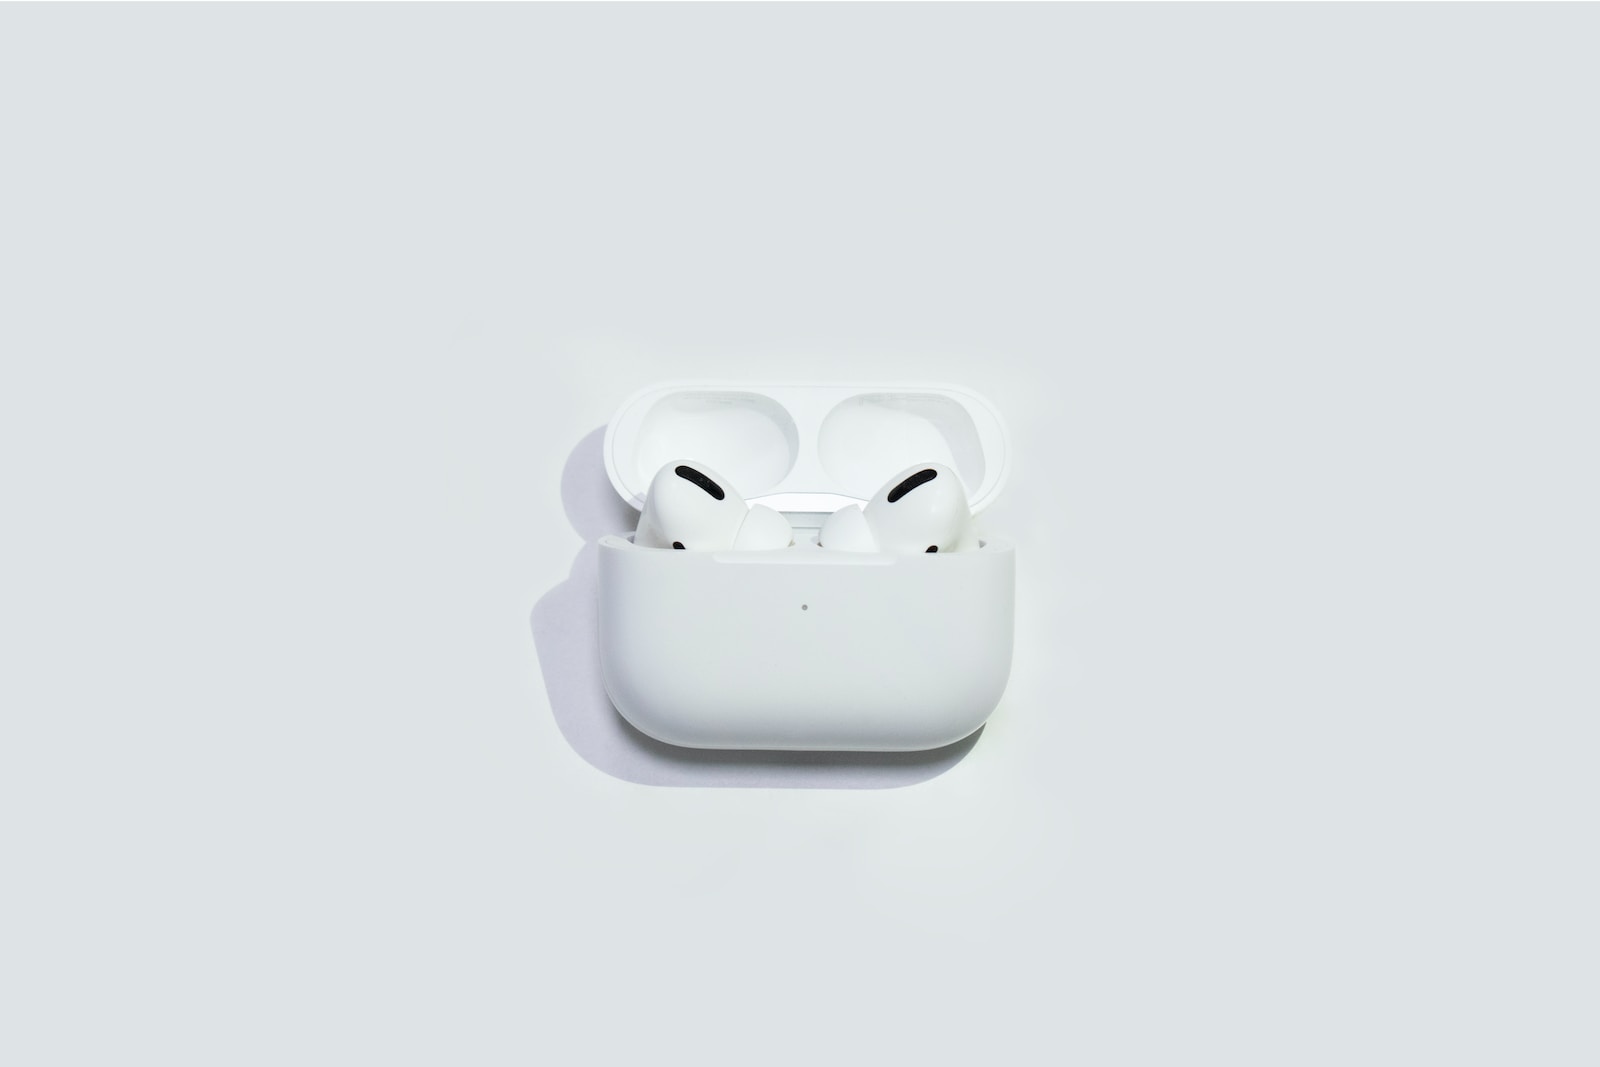 
Best Ways To Clean AirPods: A Step-By-Step Guide